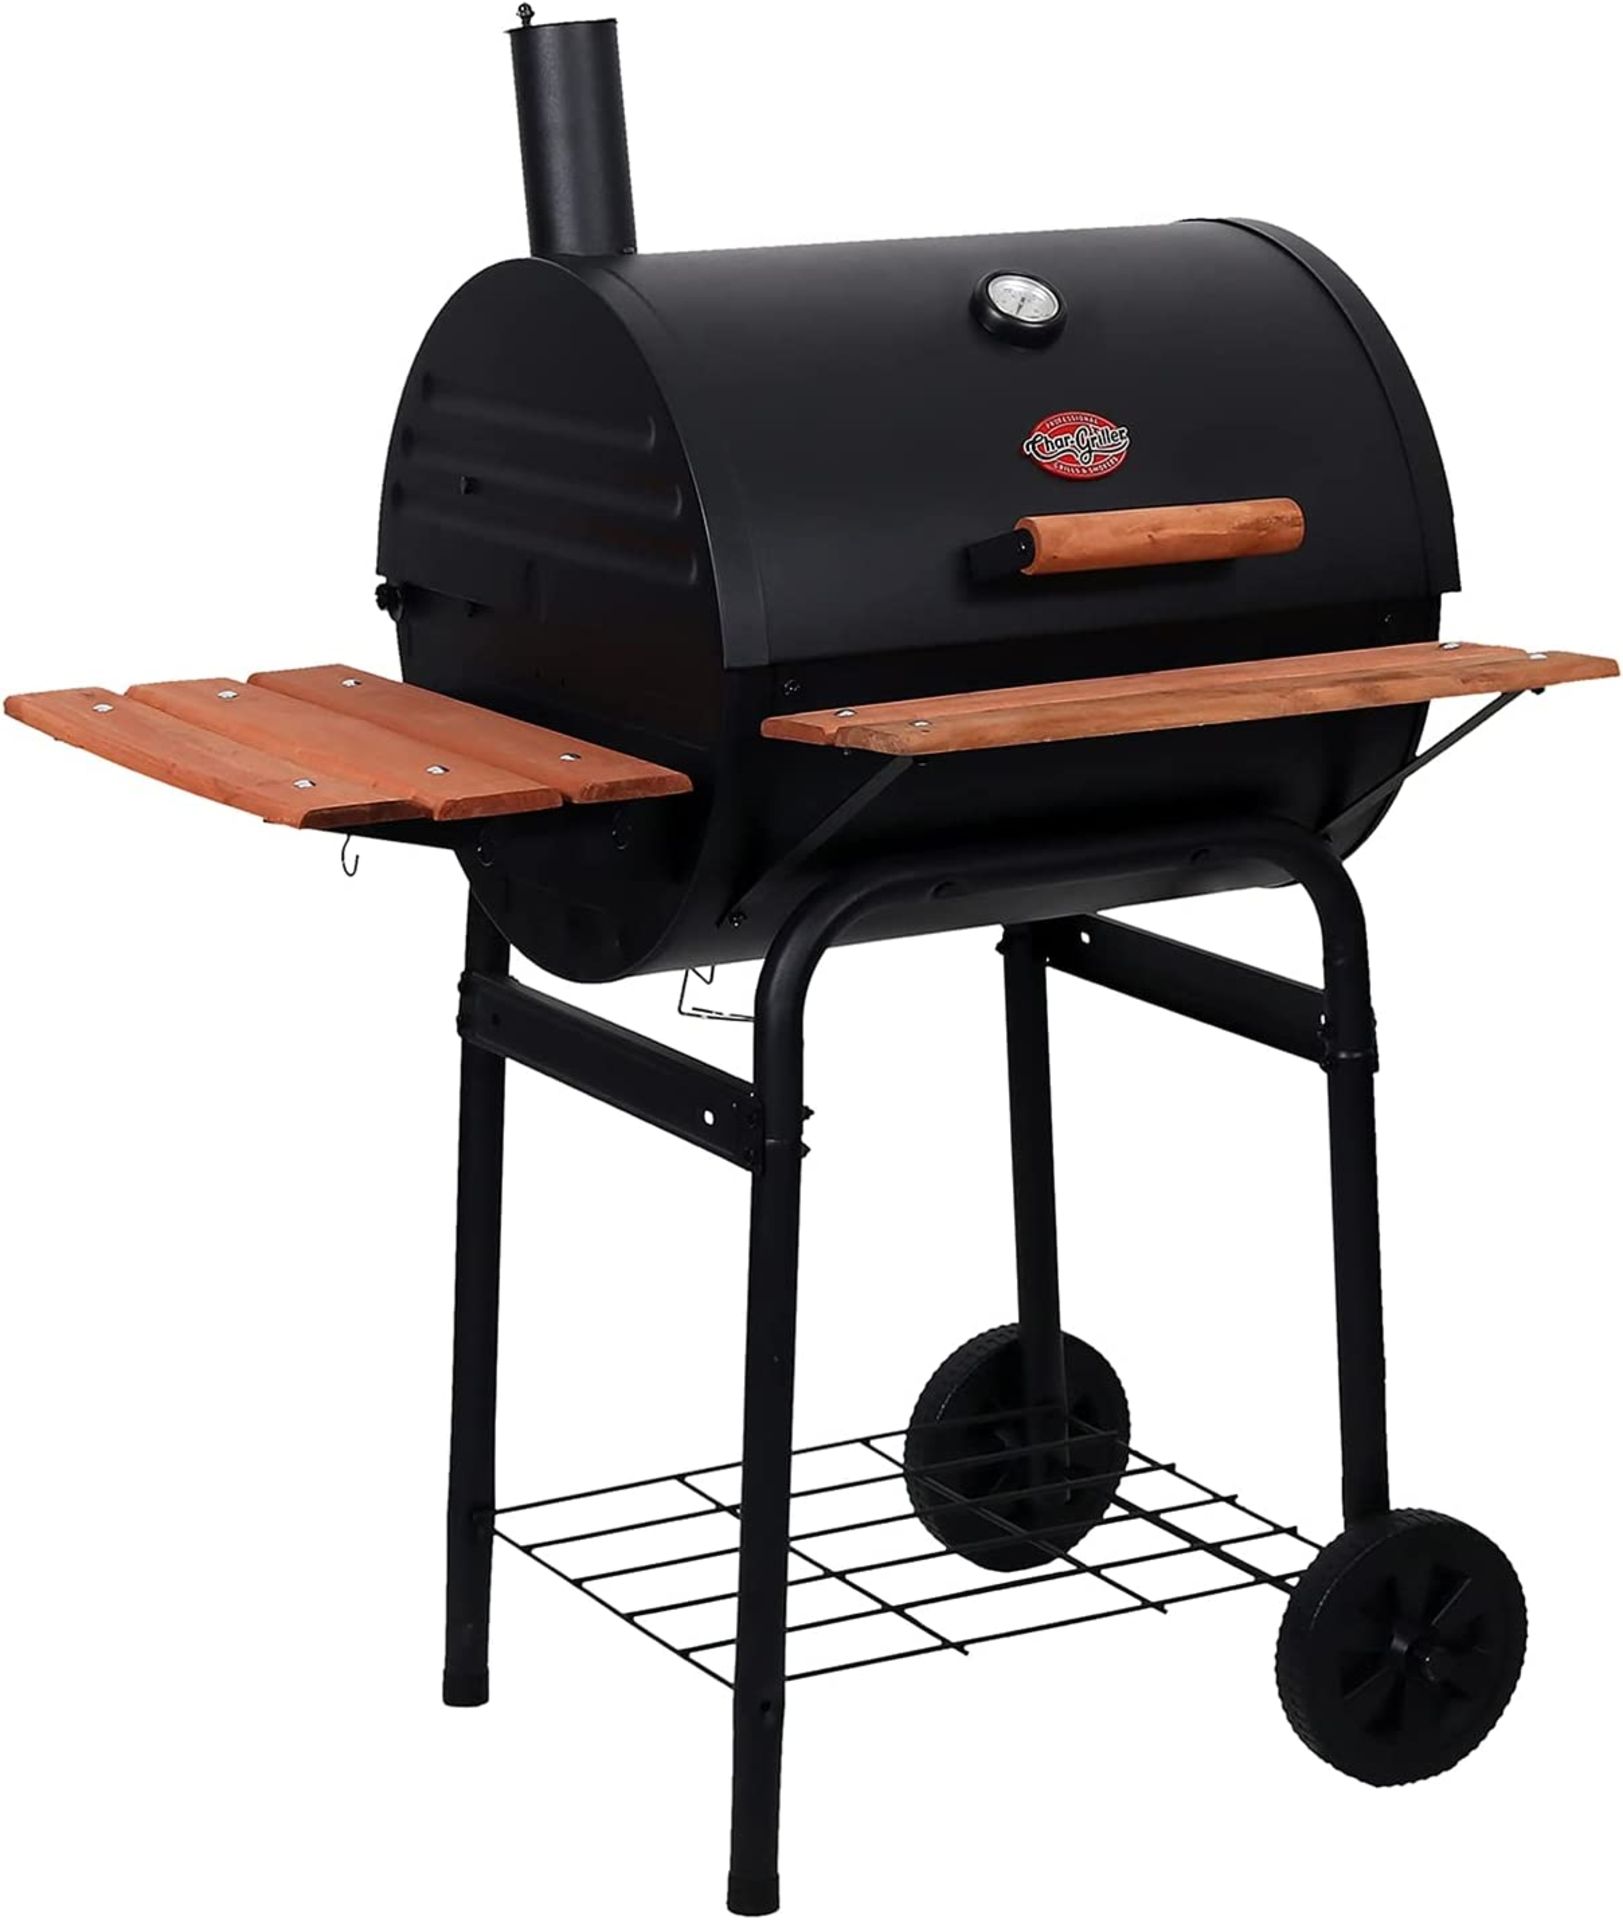 BRAND NEW - CHAR-GRILLER WRANGLER CHARCOAL BBQ WITH METAL SHELF - Image 8 of 8